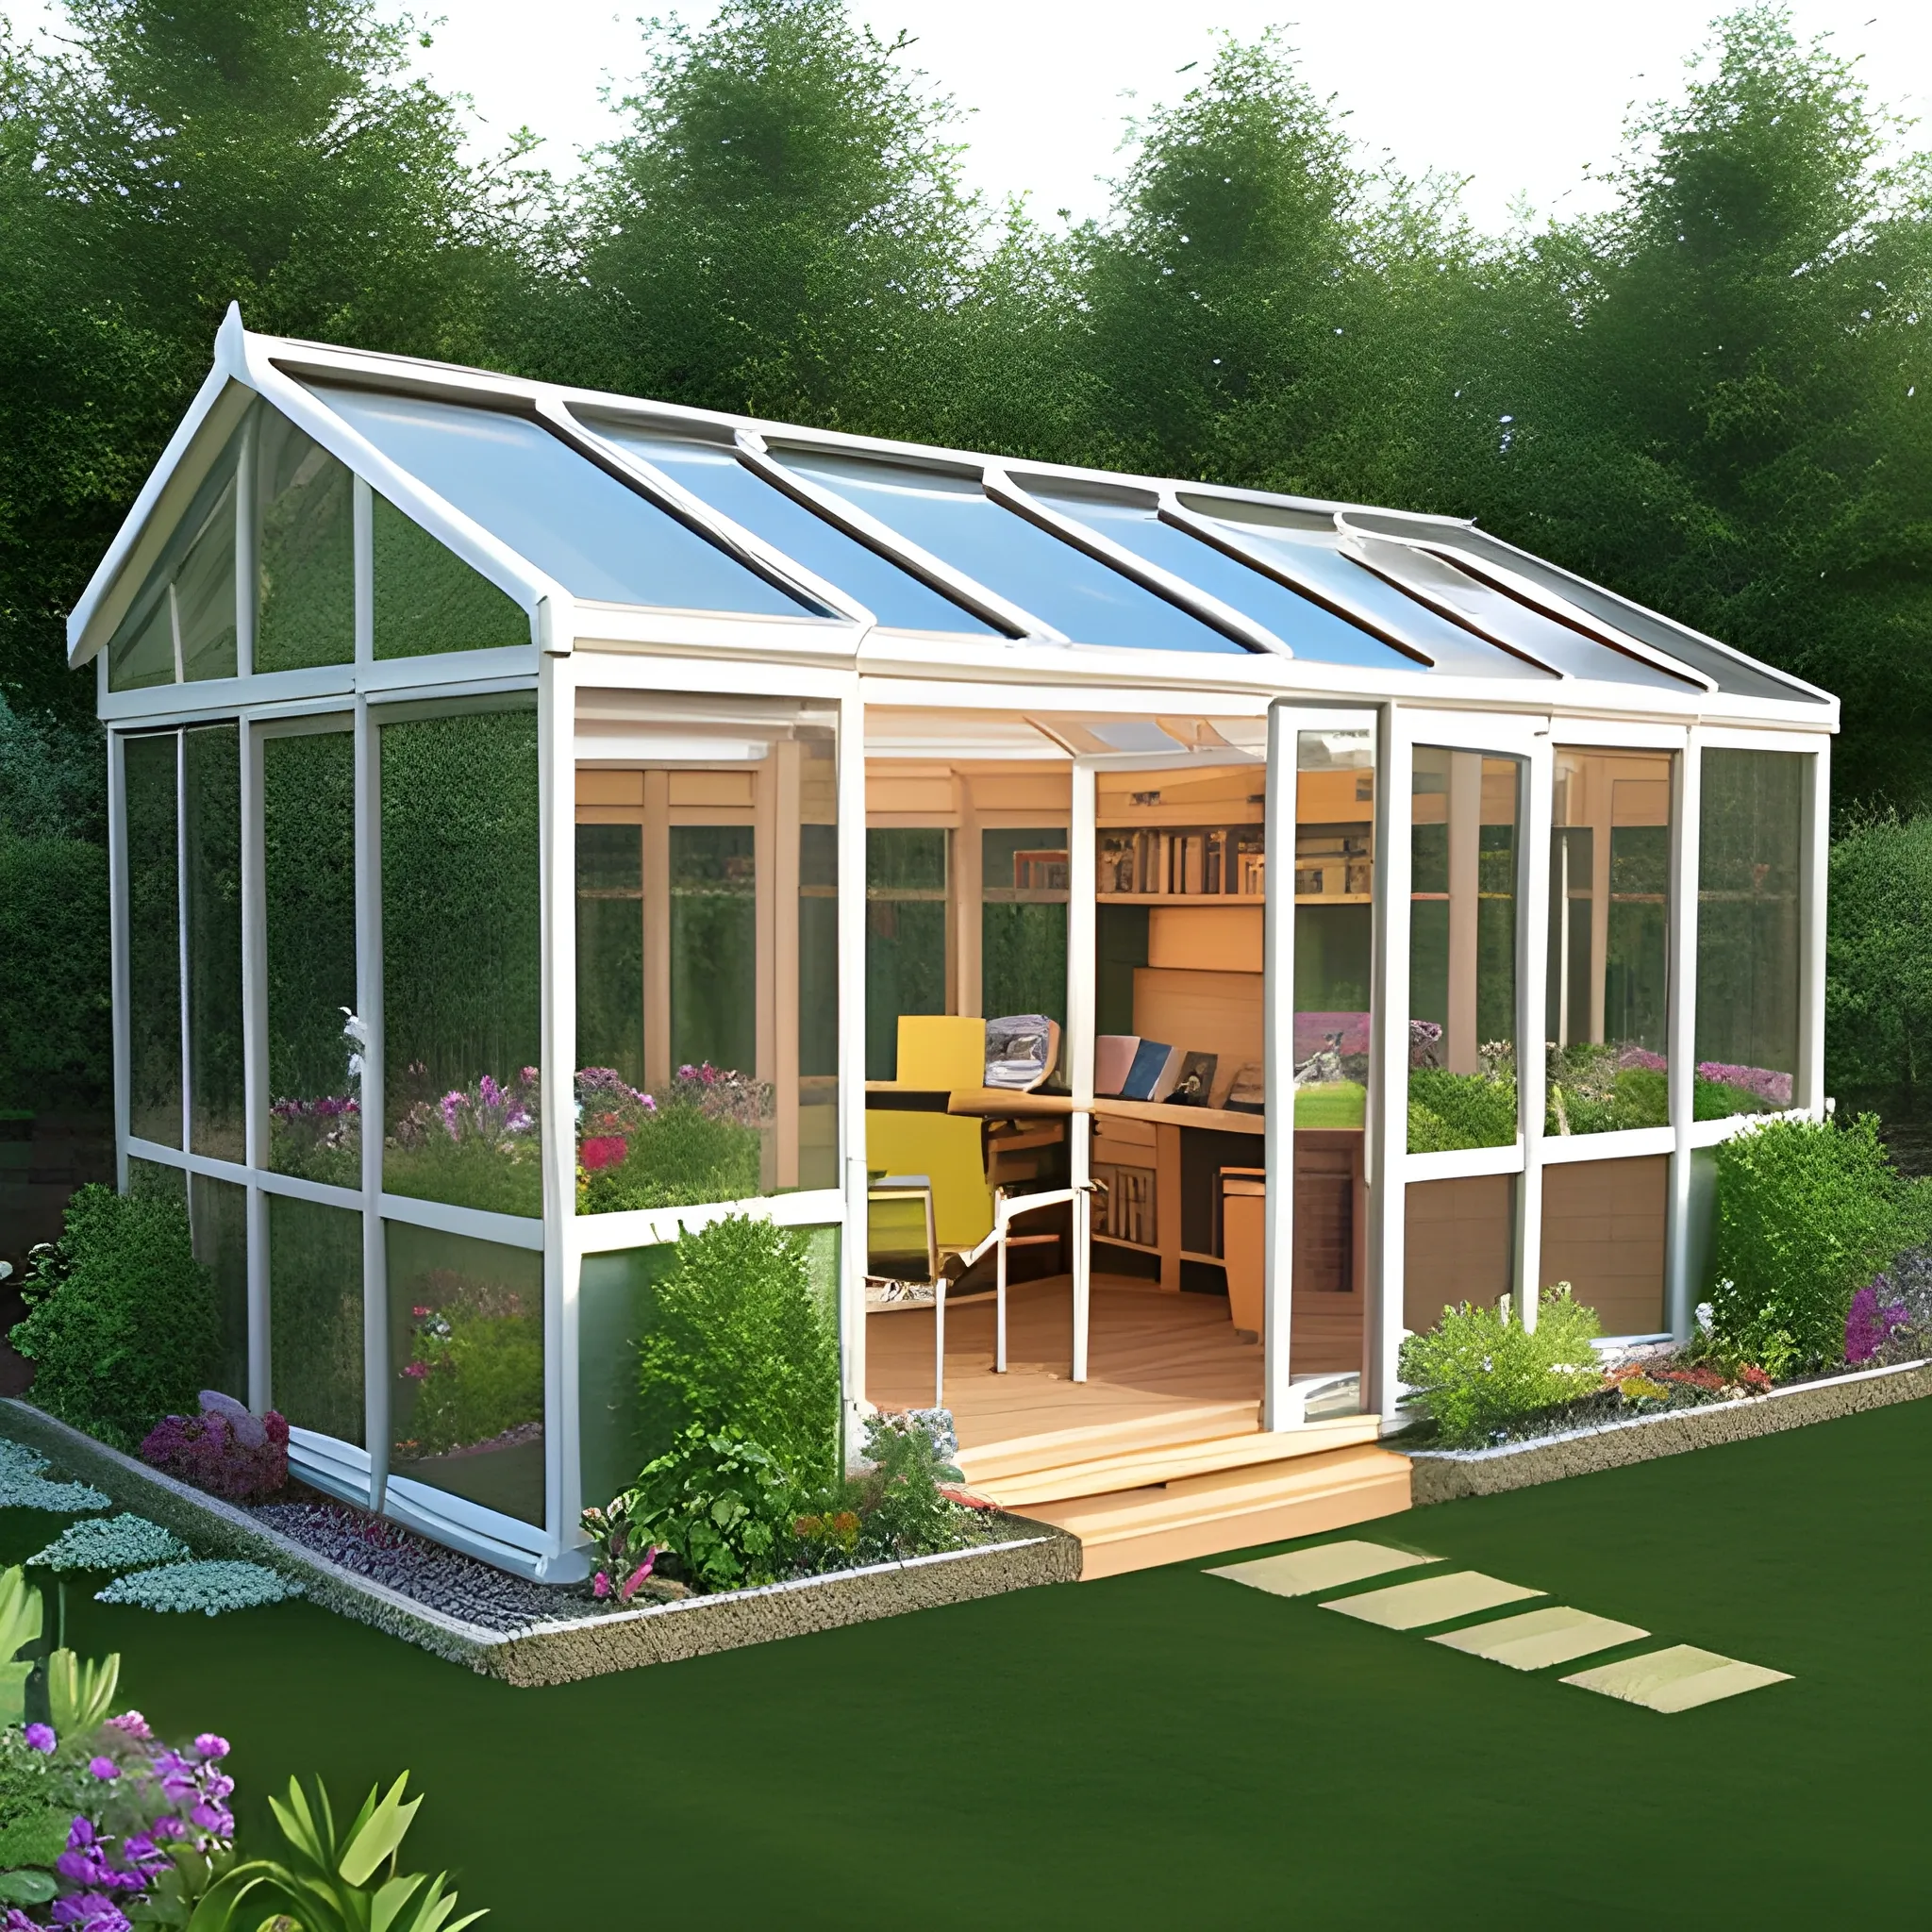 Garden office with three glass walls and a sloping roof. add a pond outside with some decking, 3D